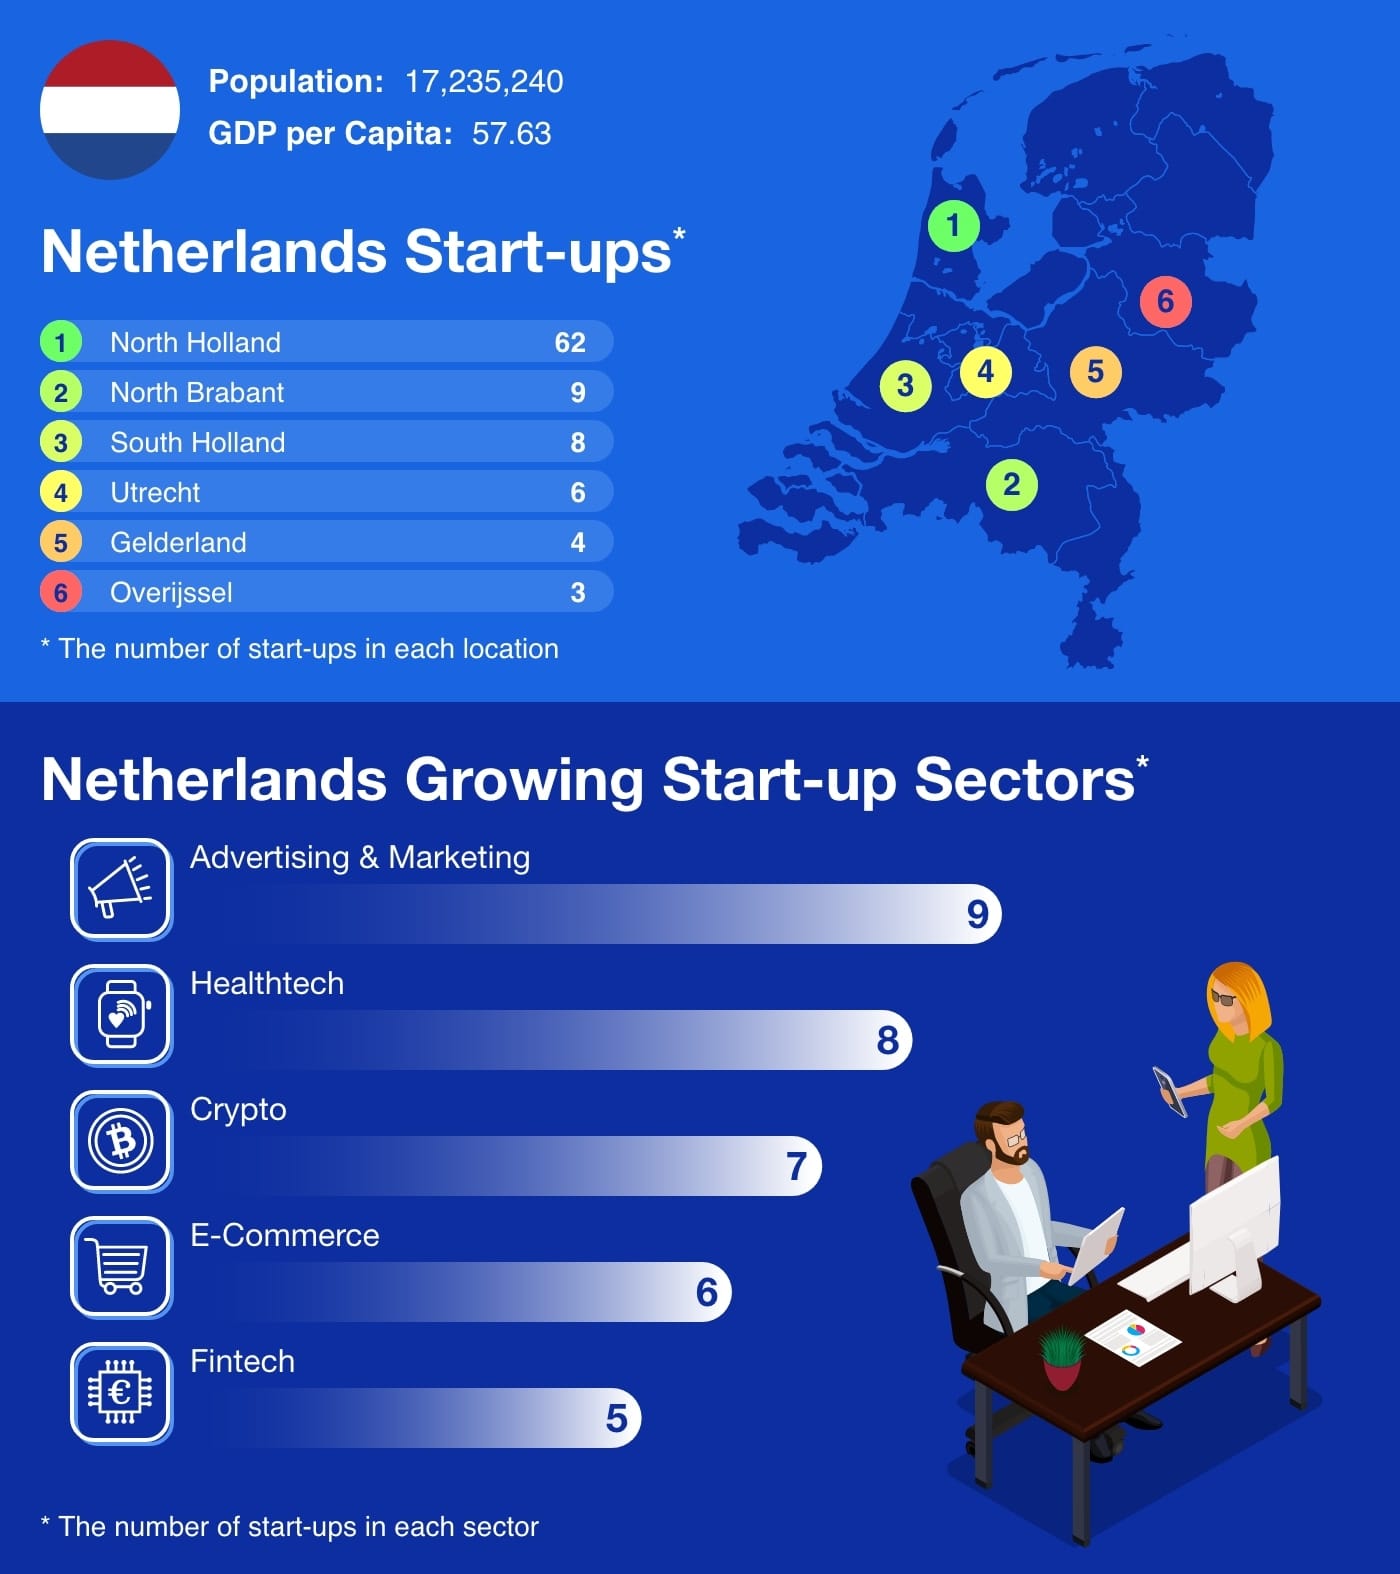 Infographic showing the number of the Netherlands start-ups by location and sector